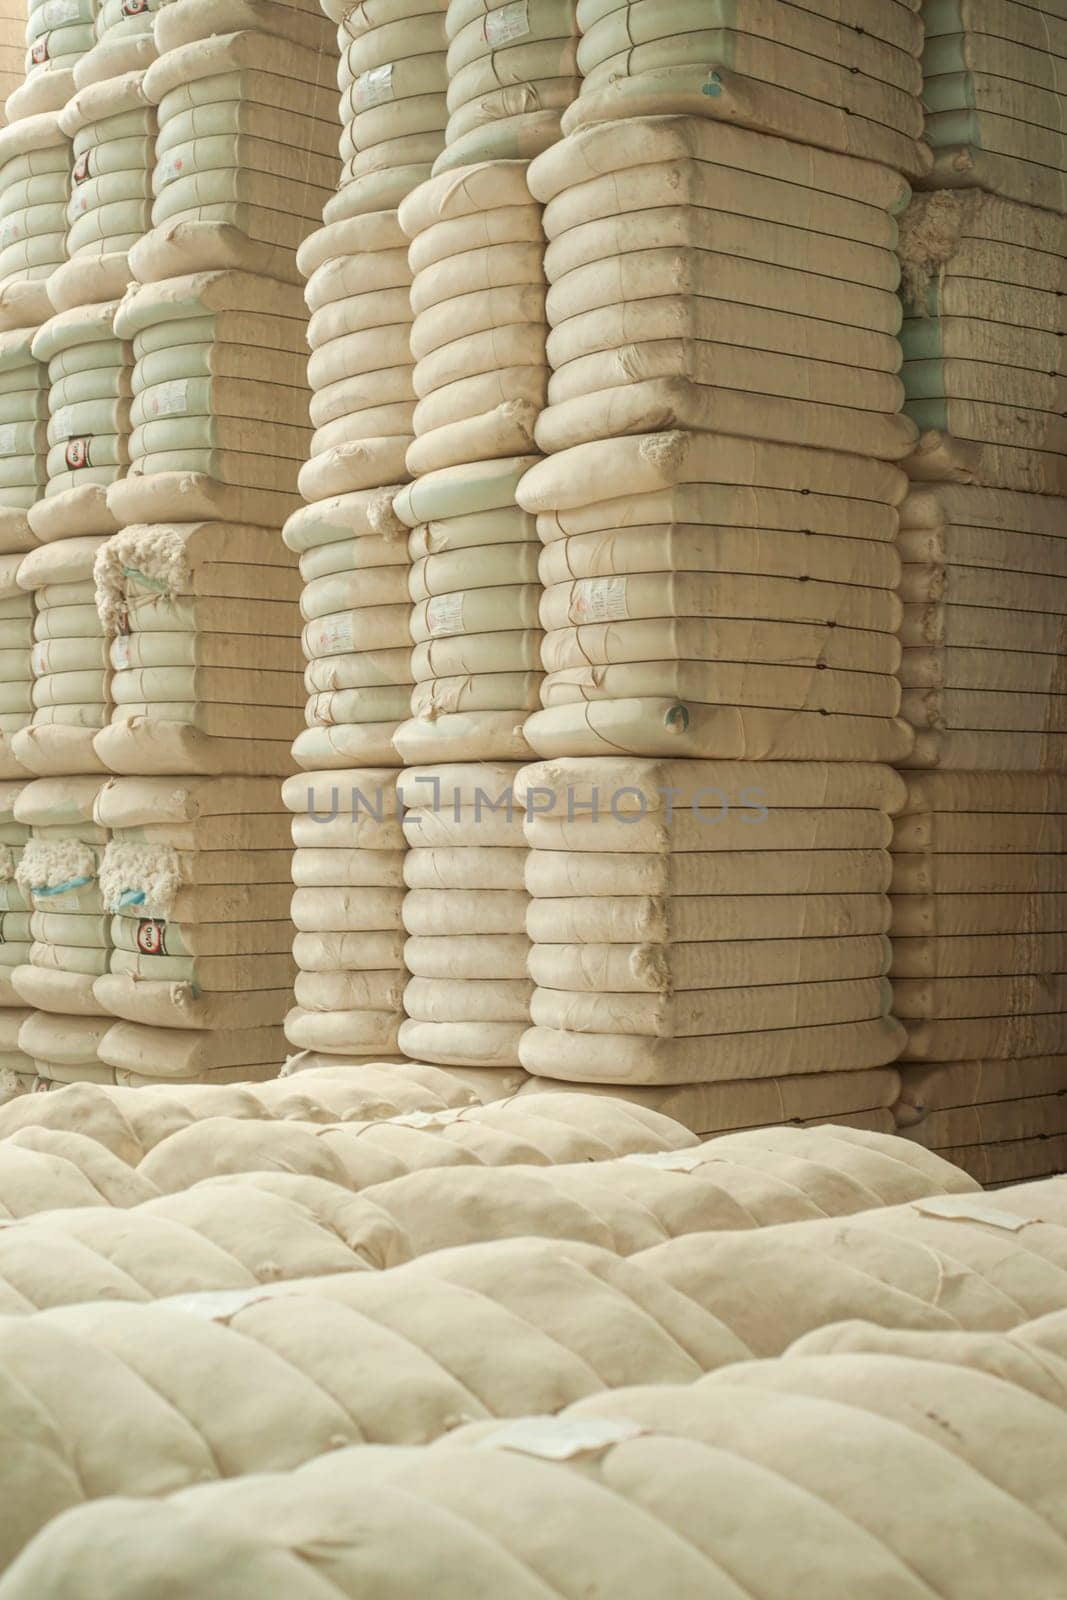 Store cotton bales. High quality photo